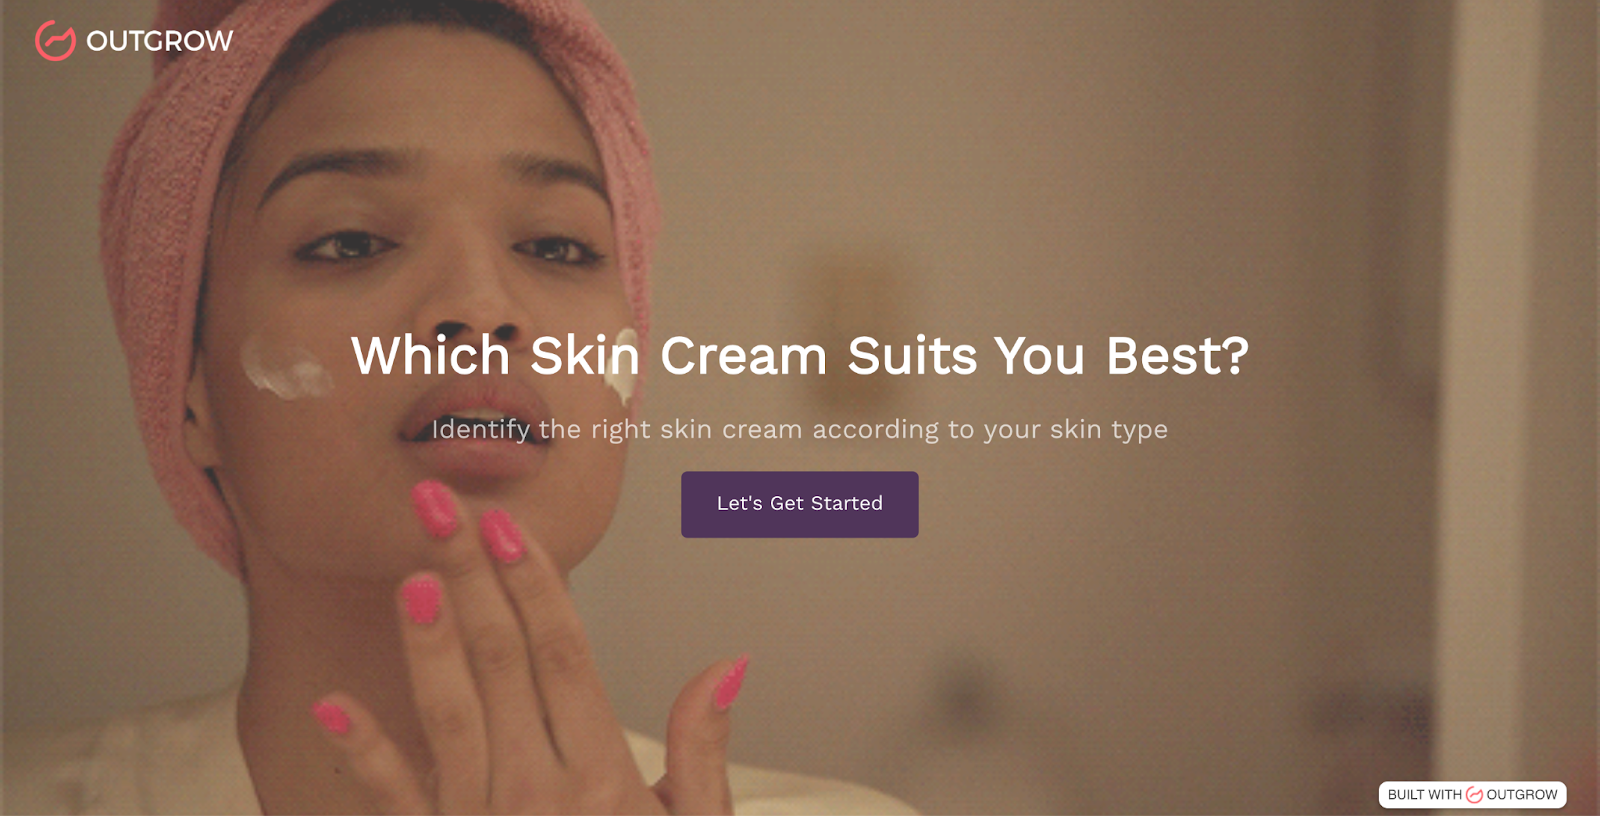 Outgrow's quiz "Which Skin Cream Suits You Best?